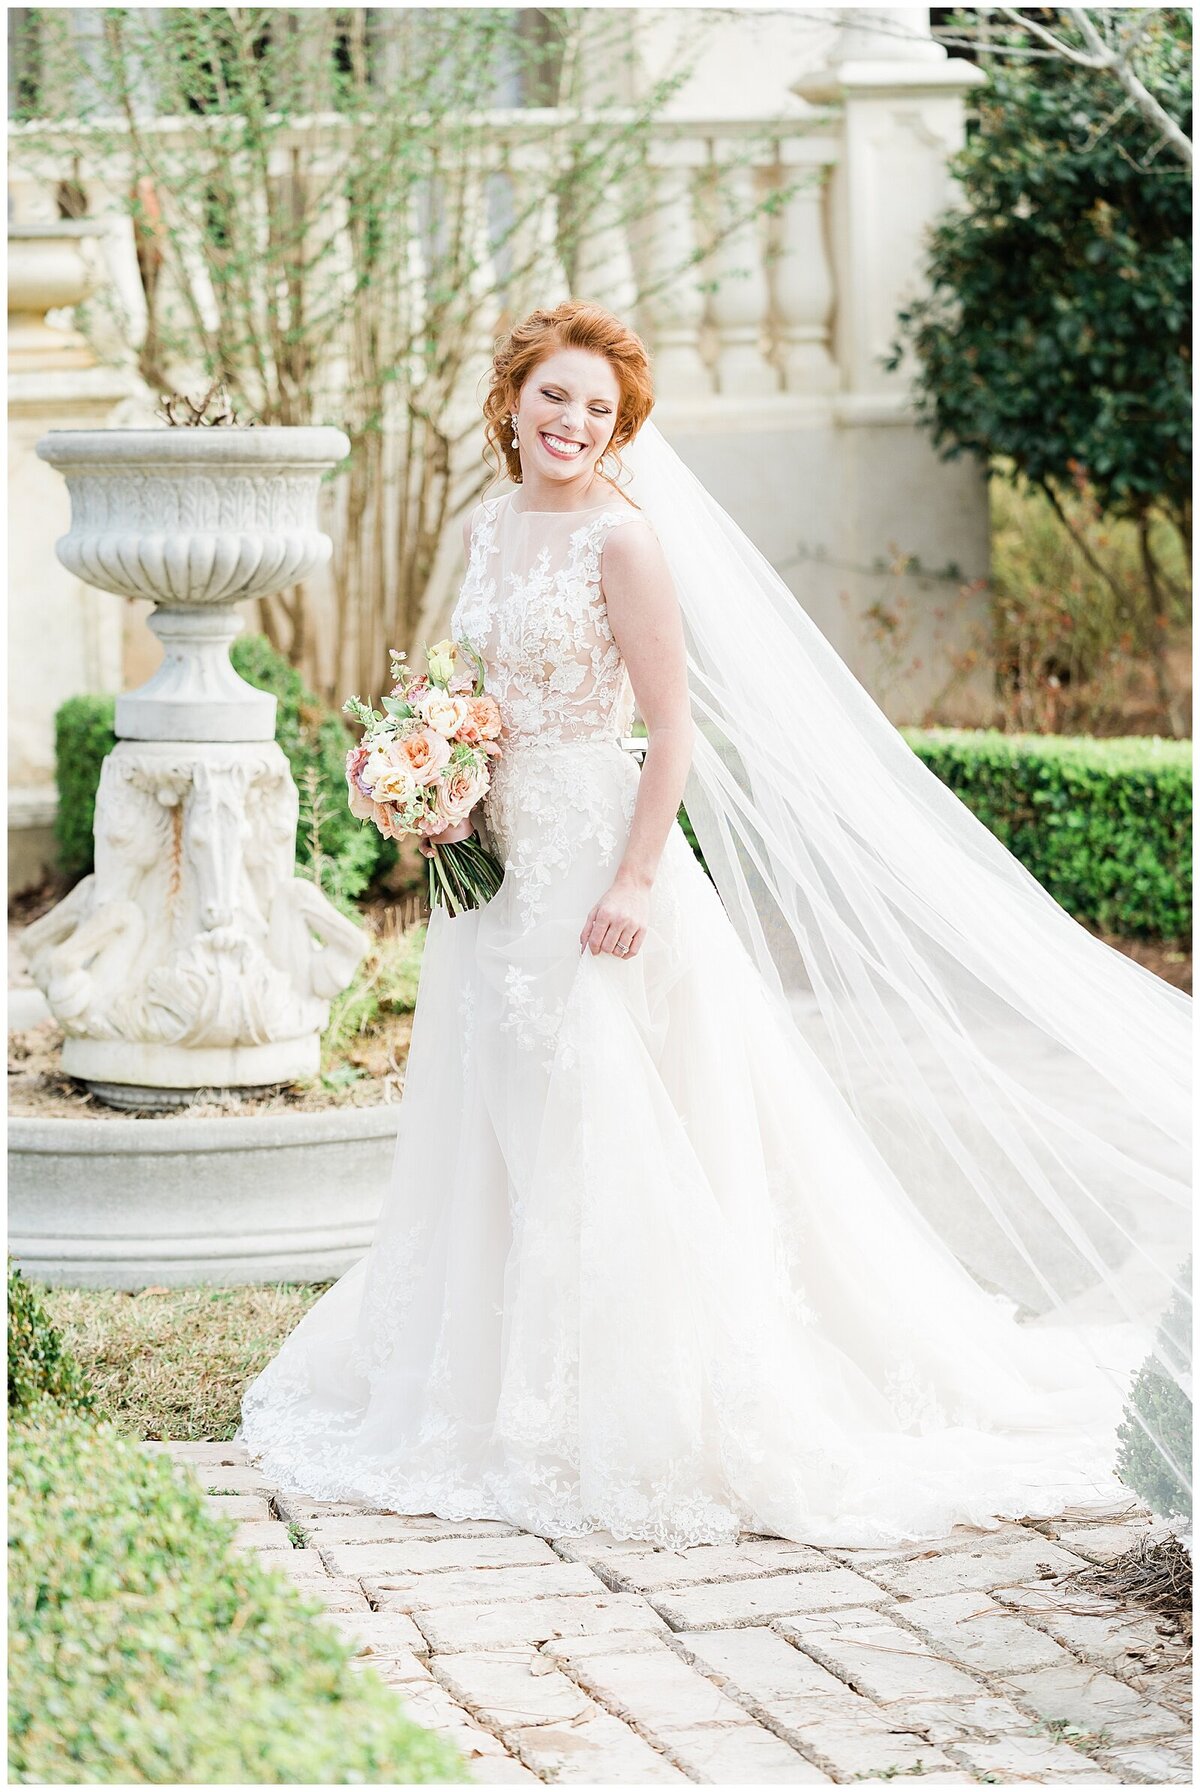 Bride with red hair posing in garden in Alabama